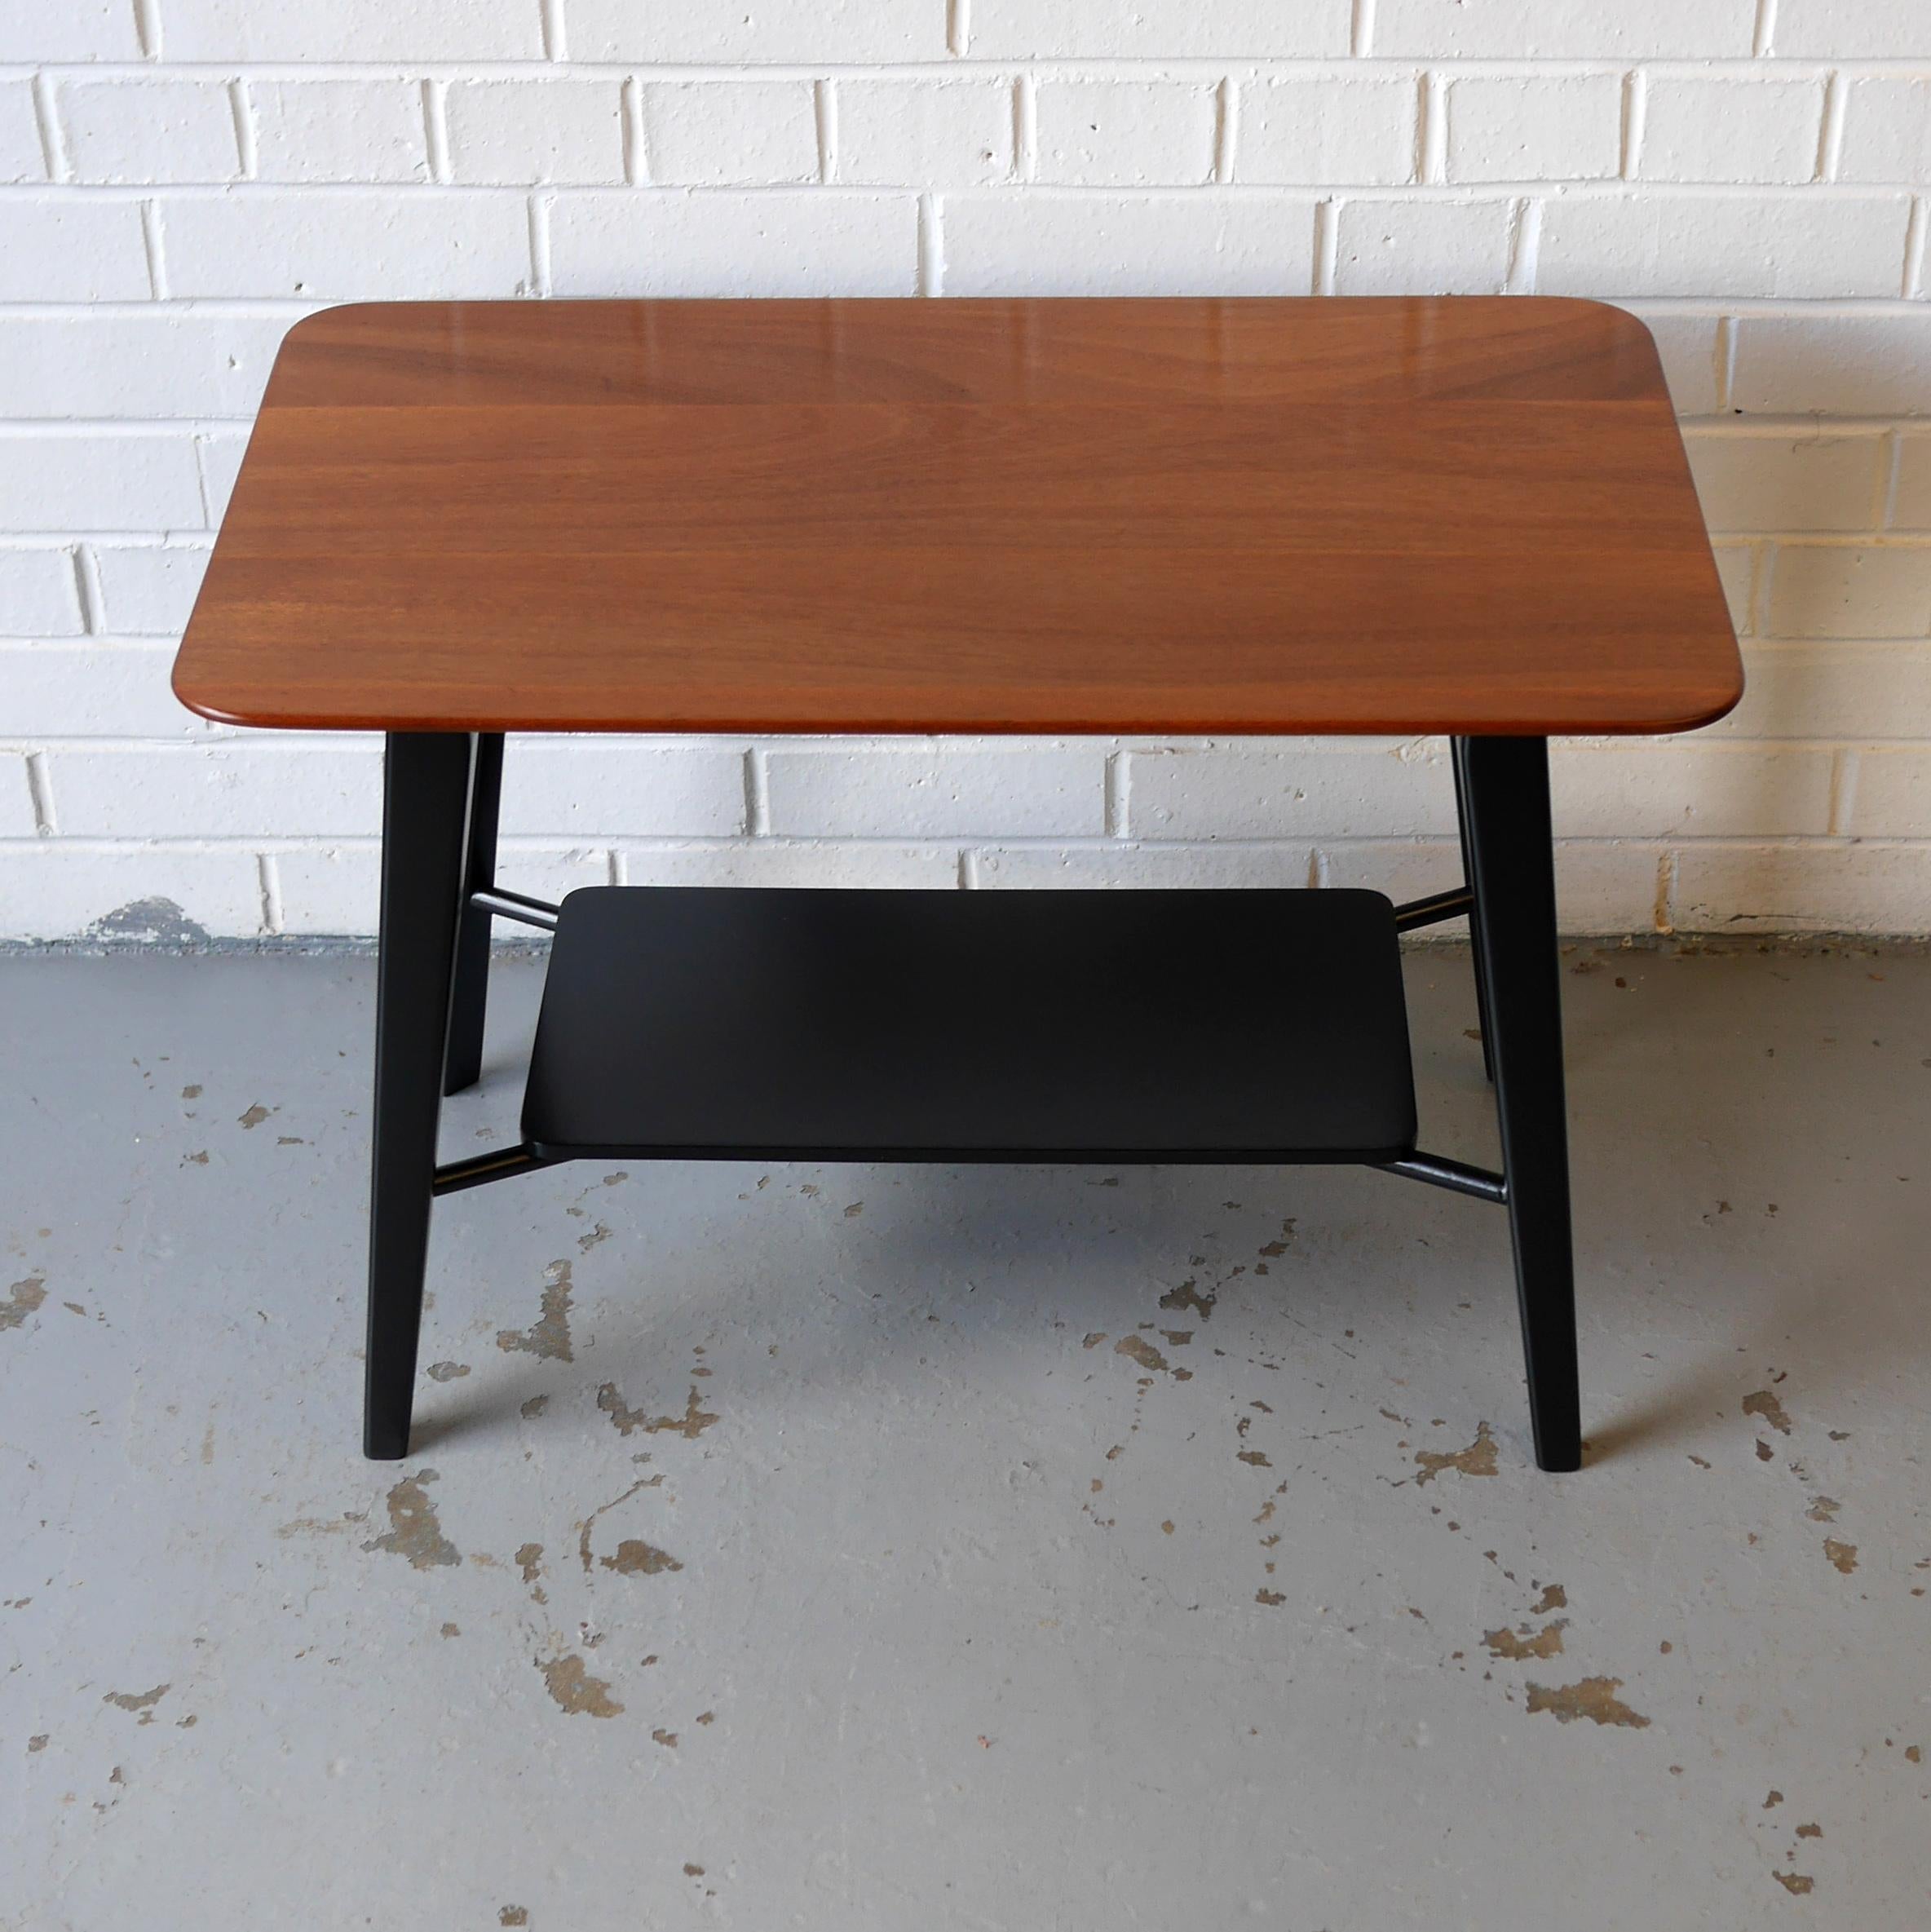 A super flexible coffee or lamp table by Peter Hayward for Vanson Furniture circa 1955 featuring a solid mahogany top with newly ebonised splayed legs and undershelf. The top is constructed from three solid planks of mahogany with rounded corners